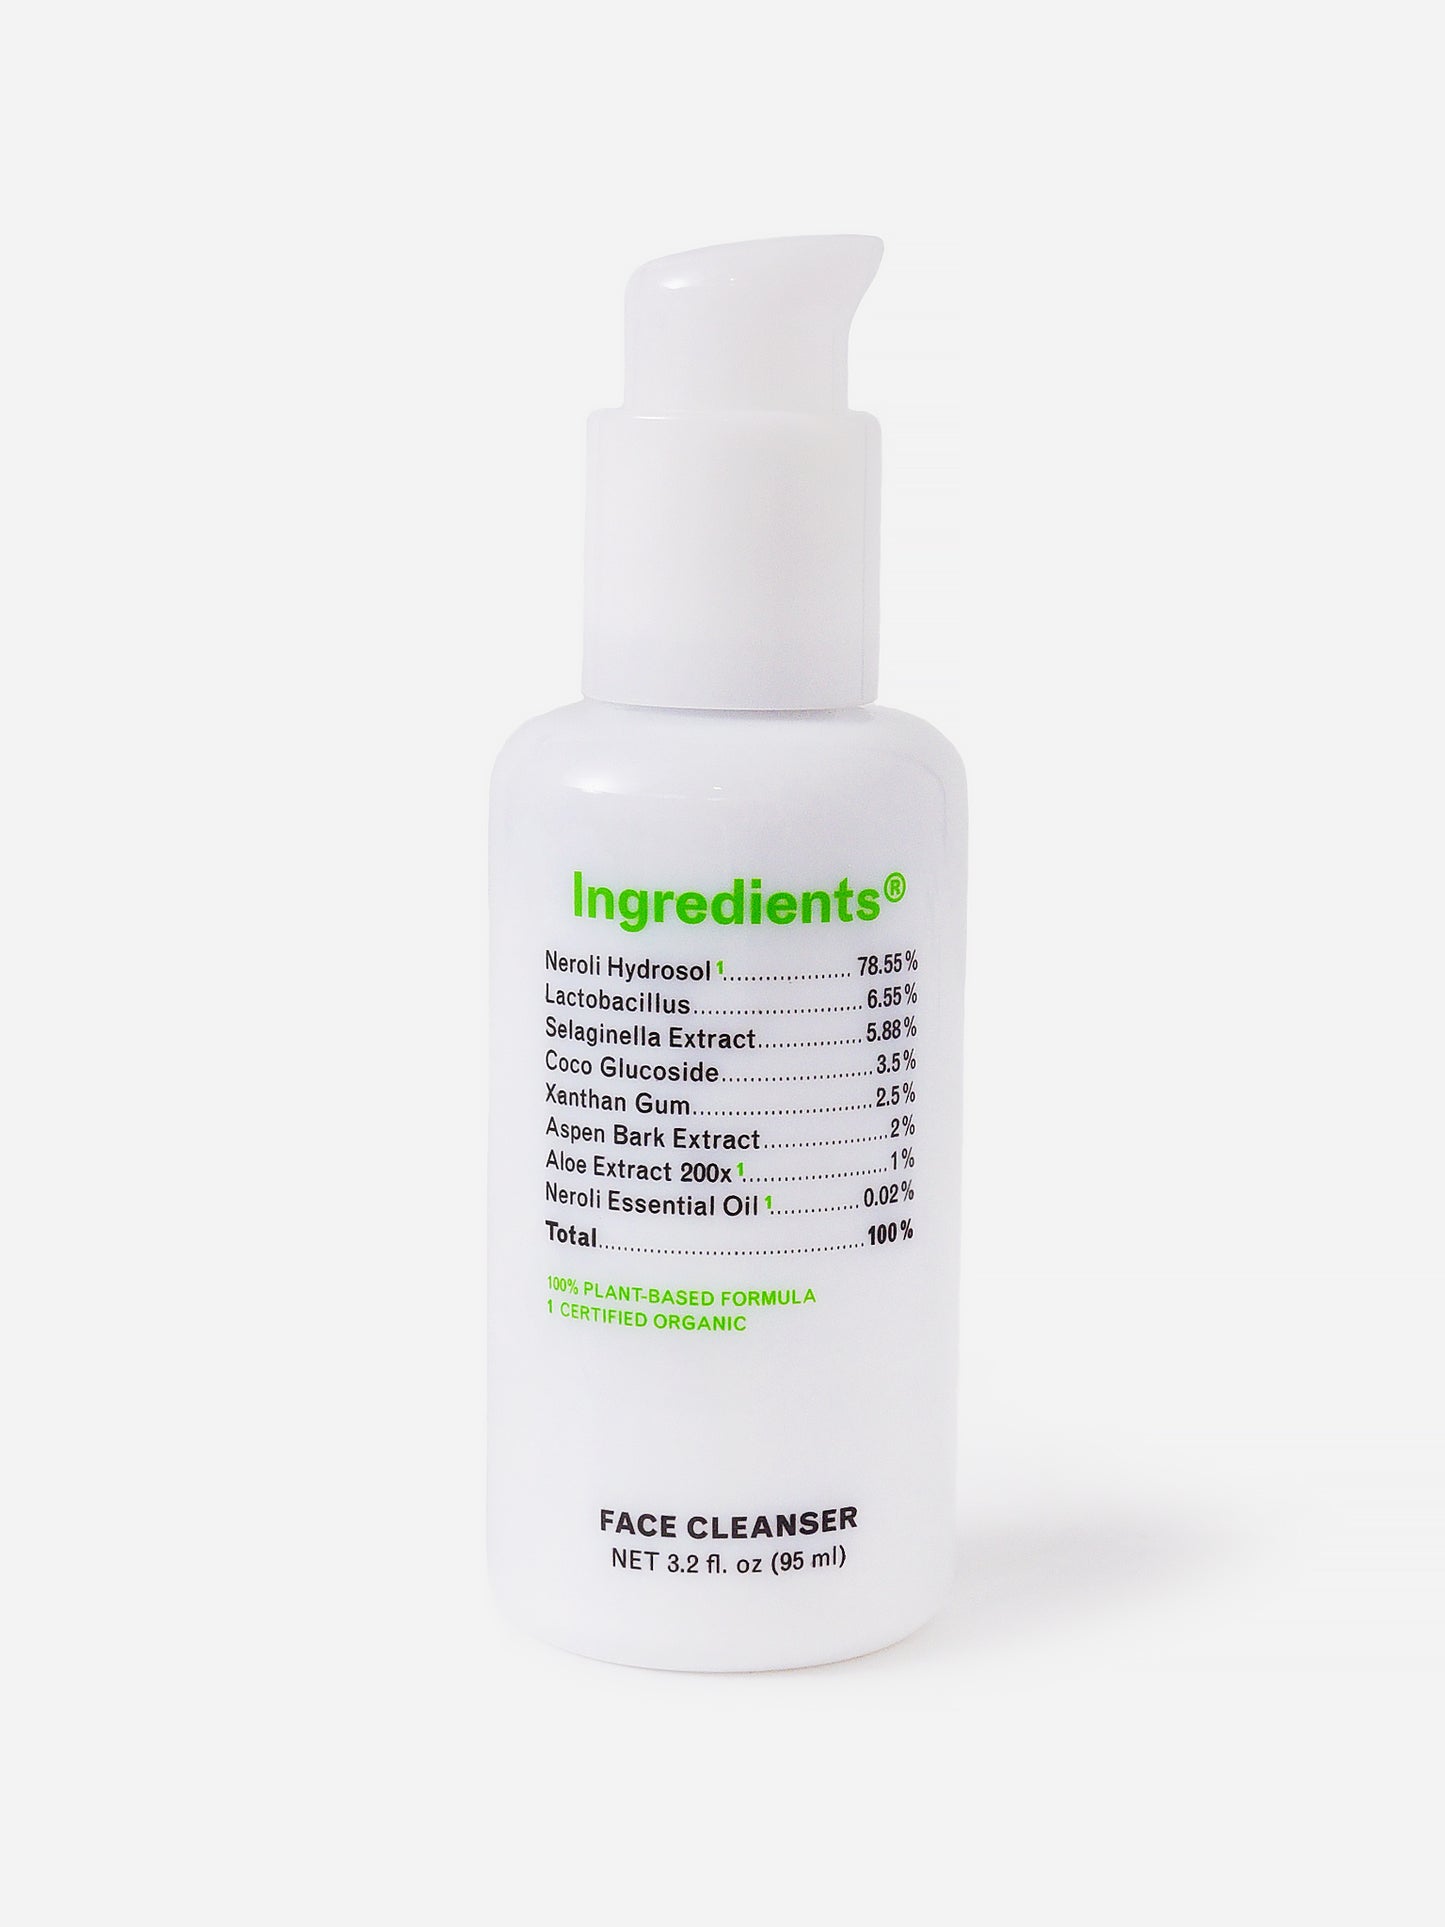 Ingredients Wellness Face Cleanser